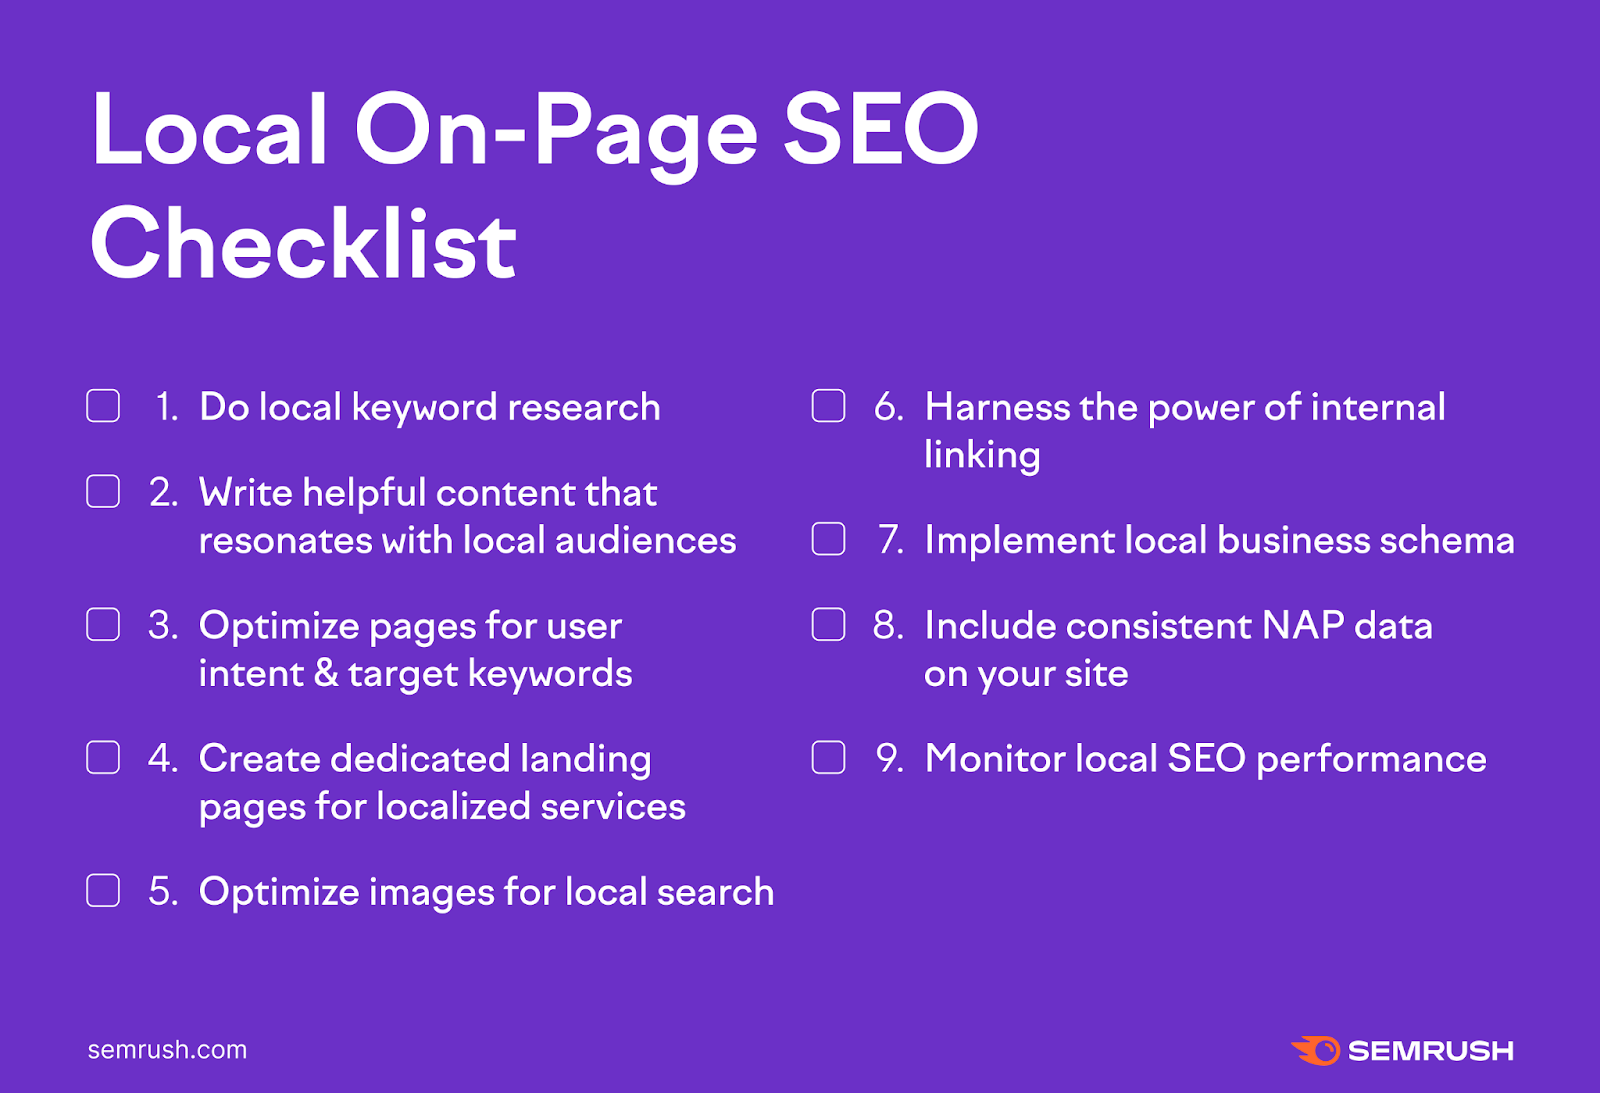 local on-page SEO checklist with 9 top tips that reflect this article's table of contents